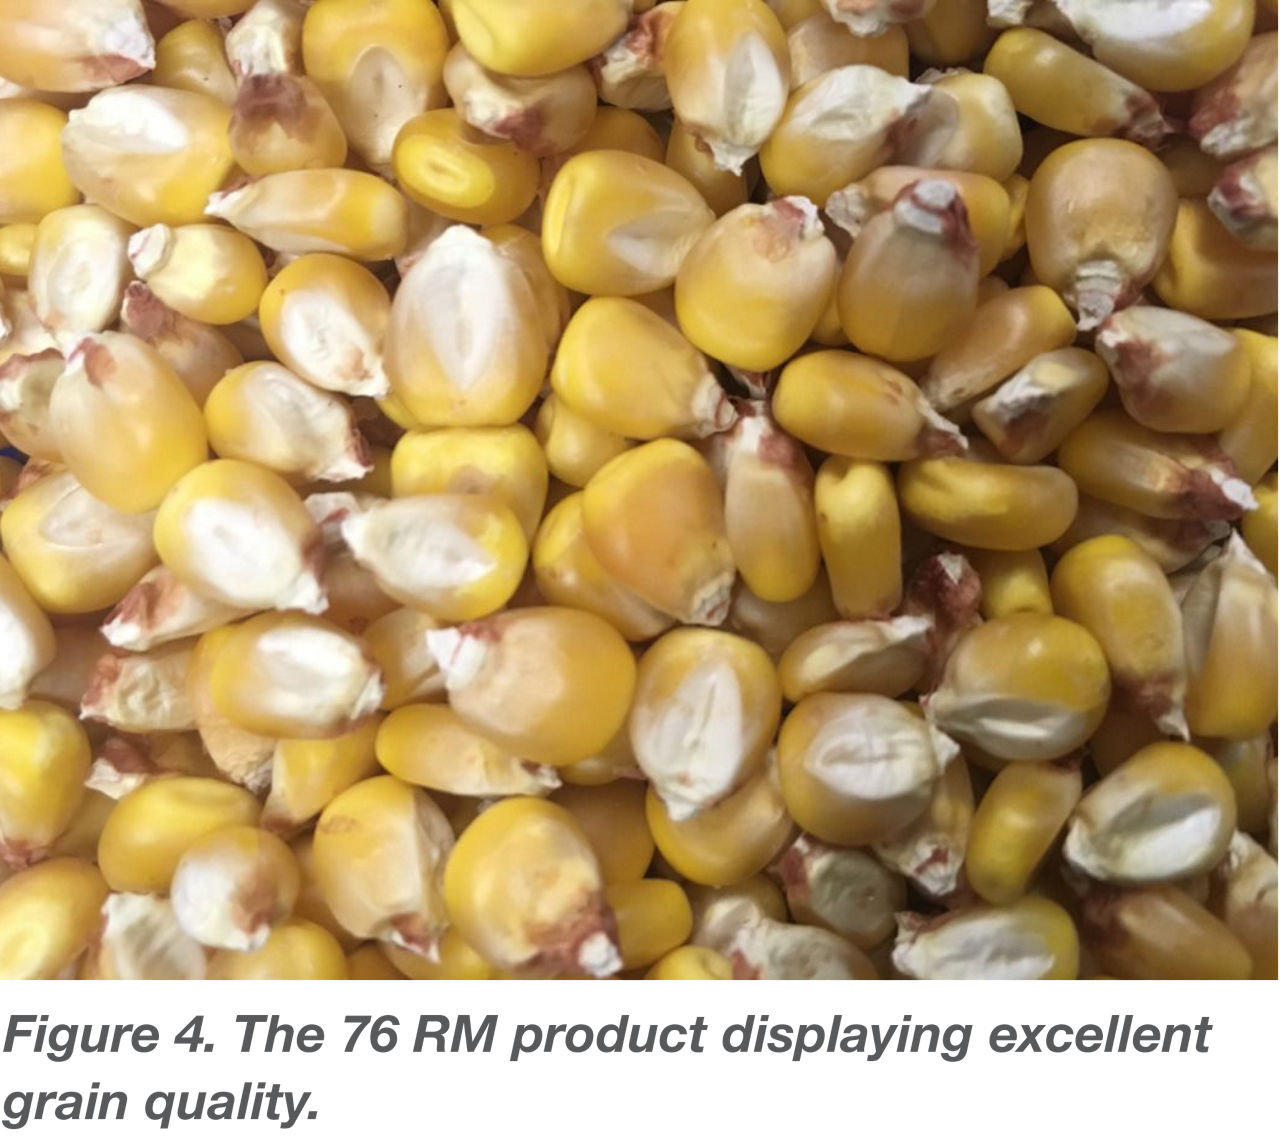 The 76RM product displaying excellent grain quality